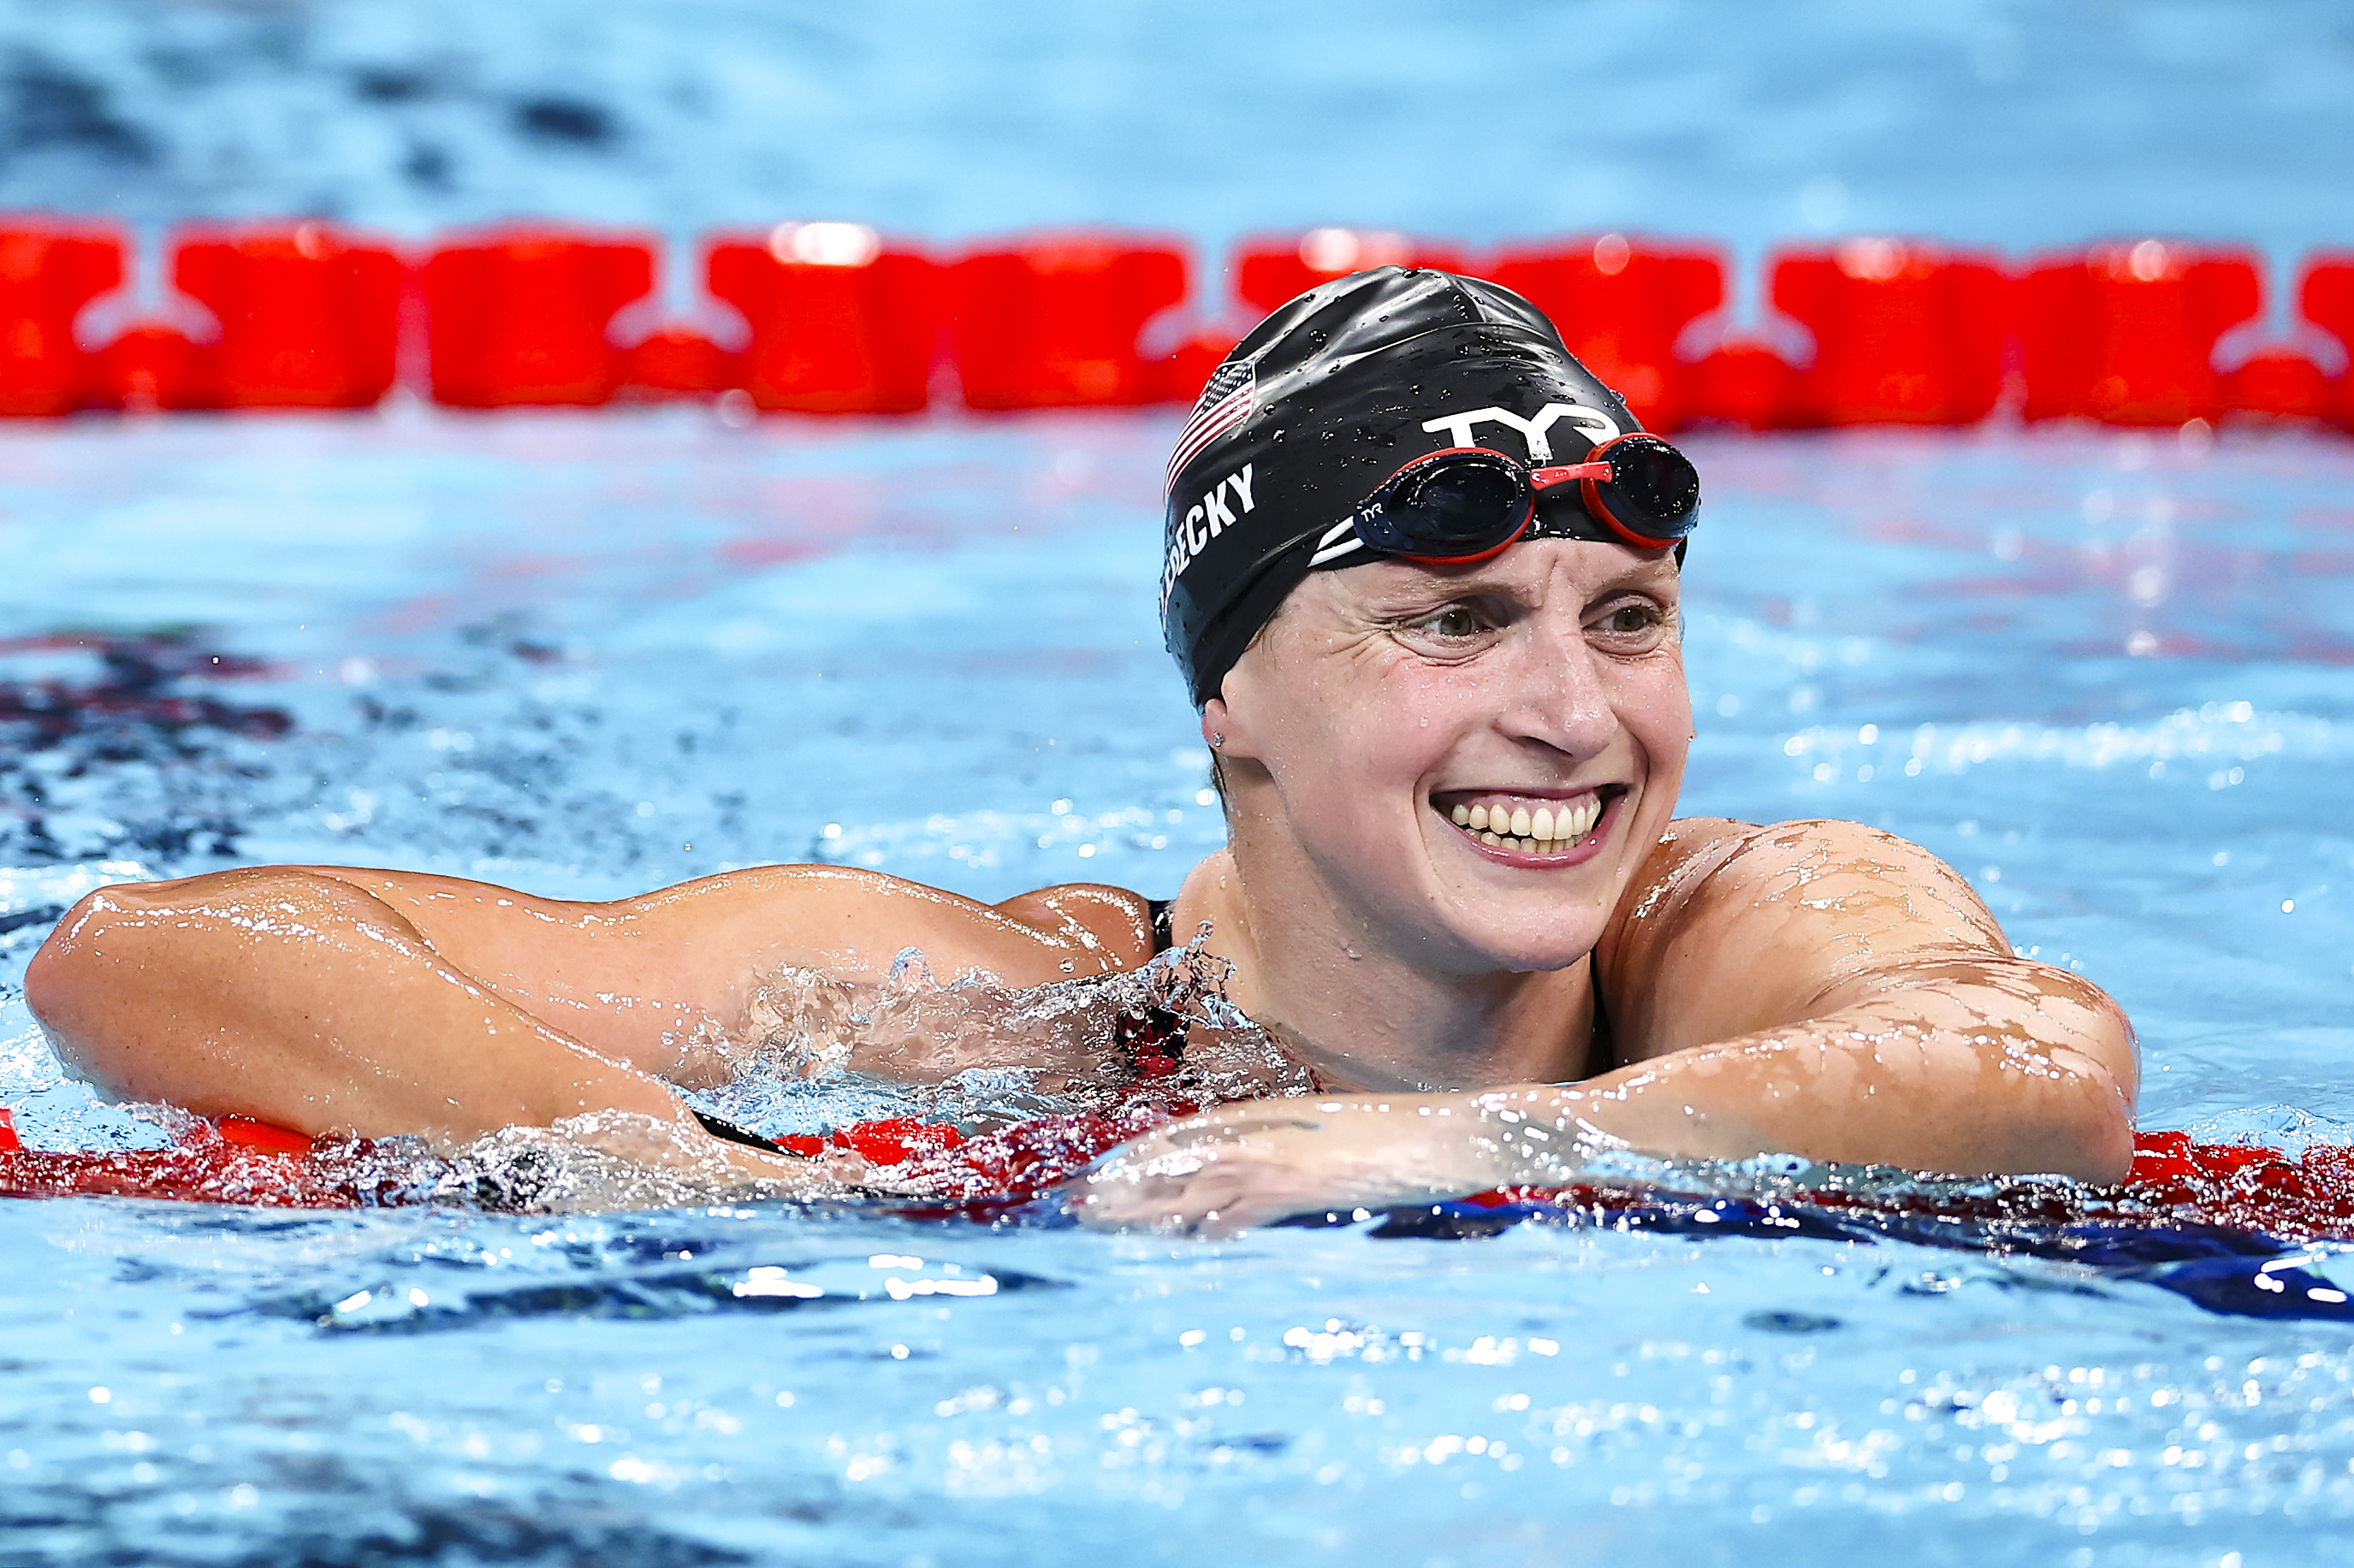 Paris Olympics Day 5: Ledecky Takes Gold in 1,500-Meter Freestyle